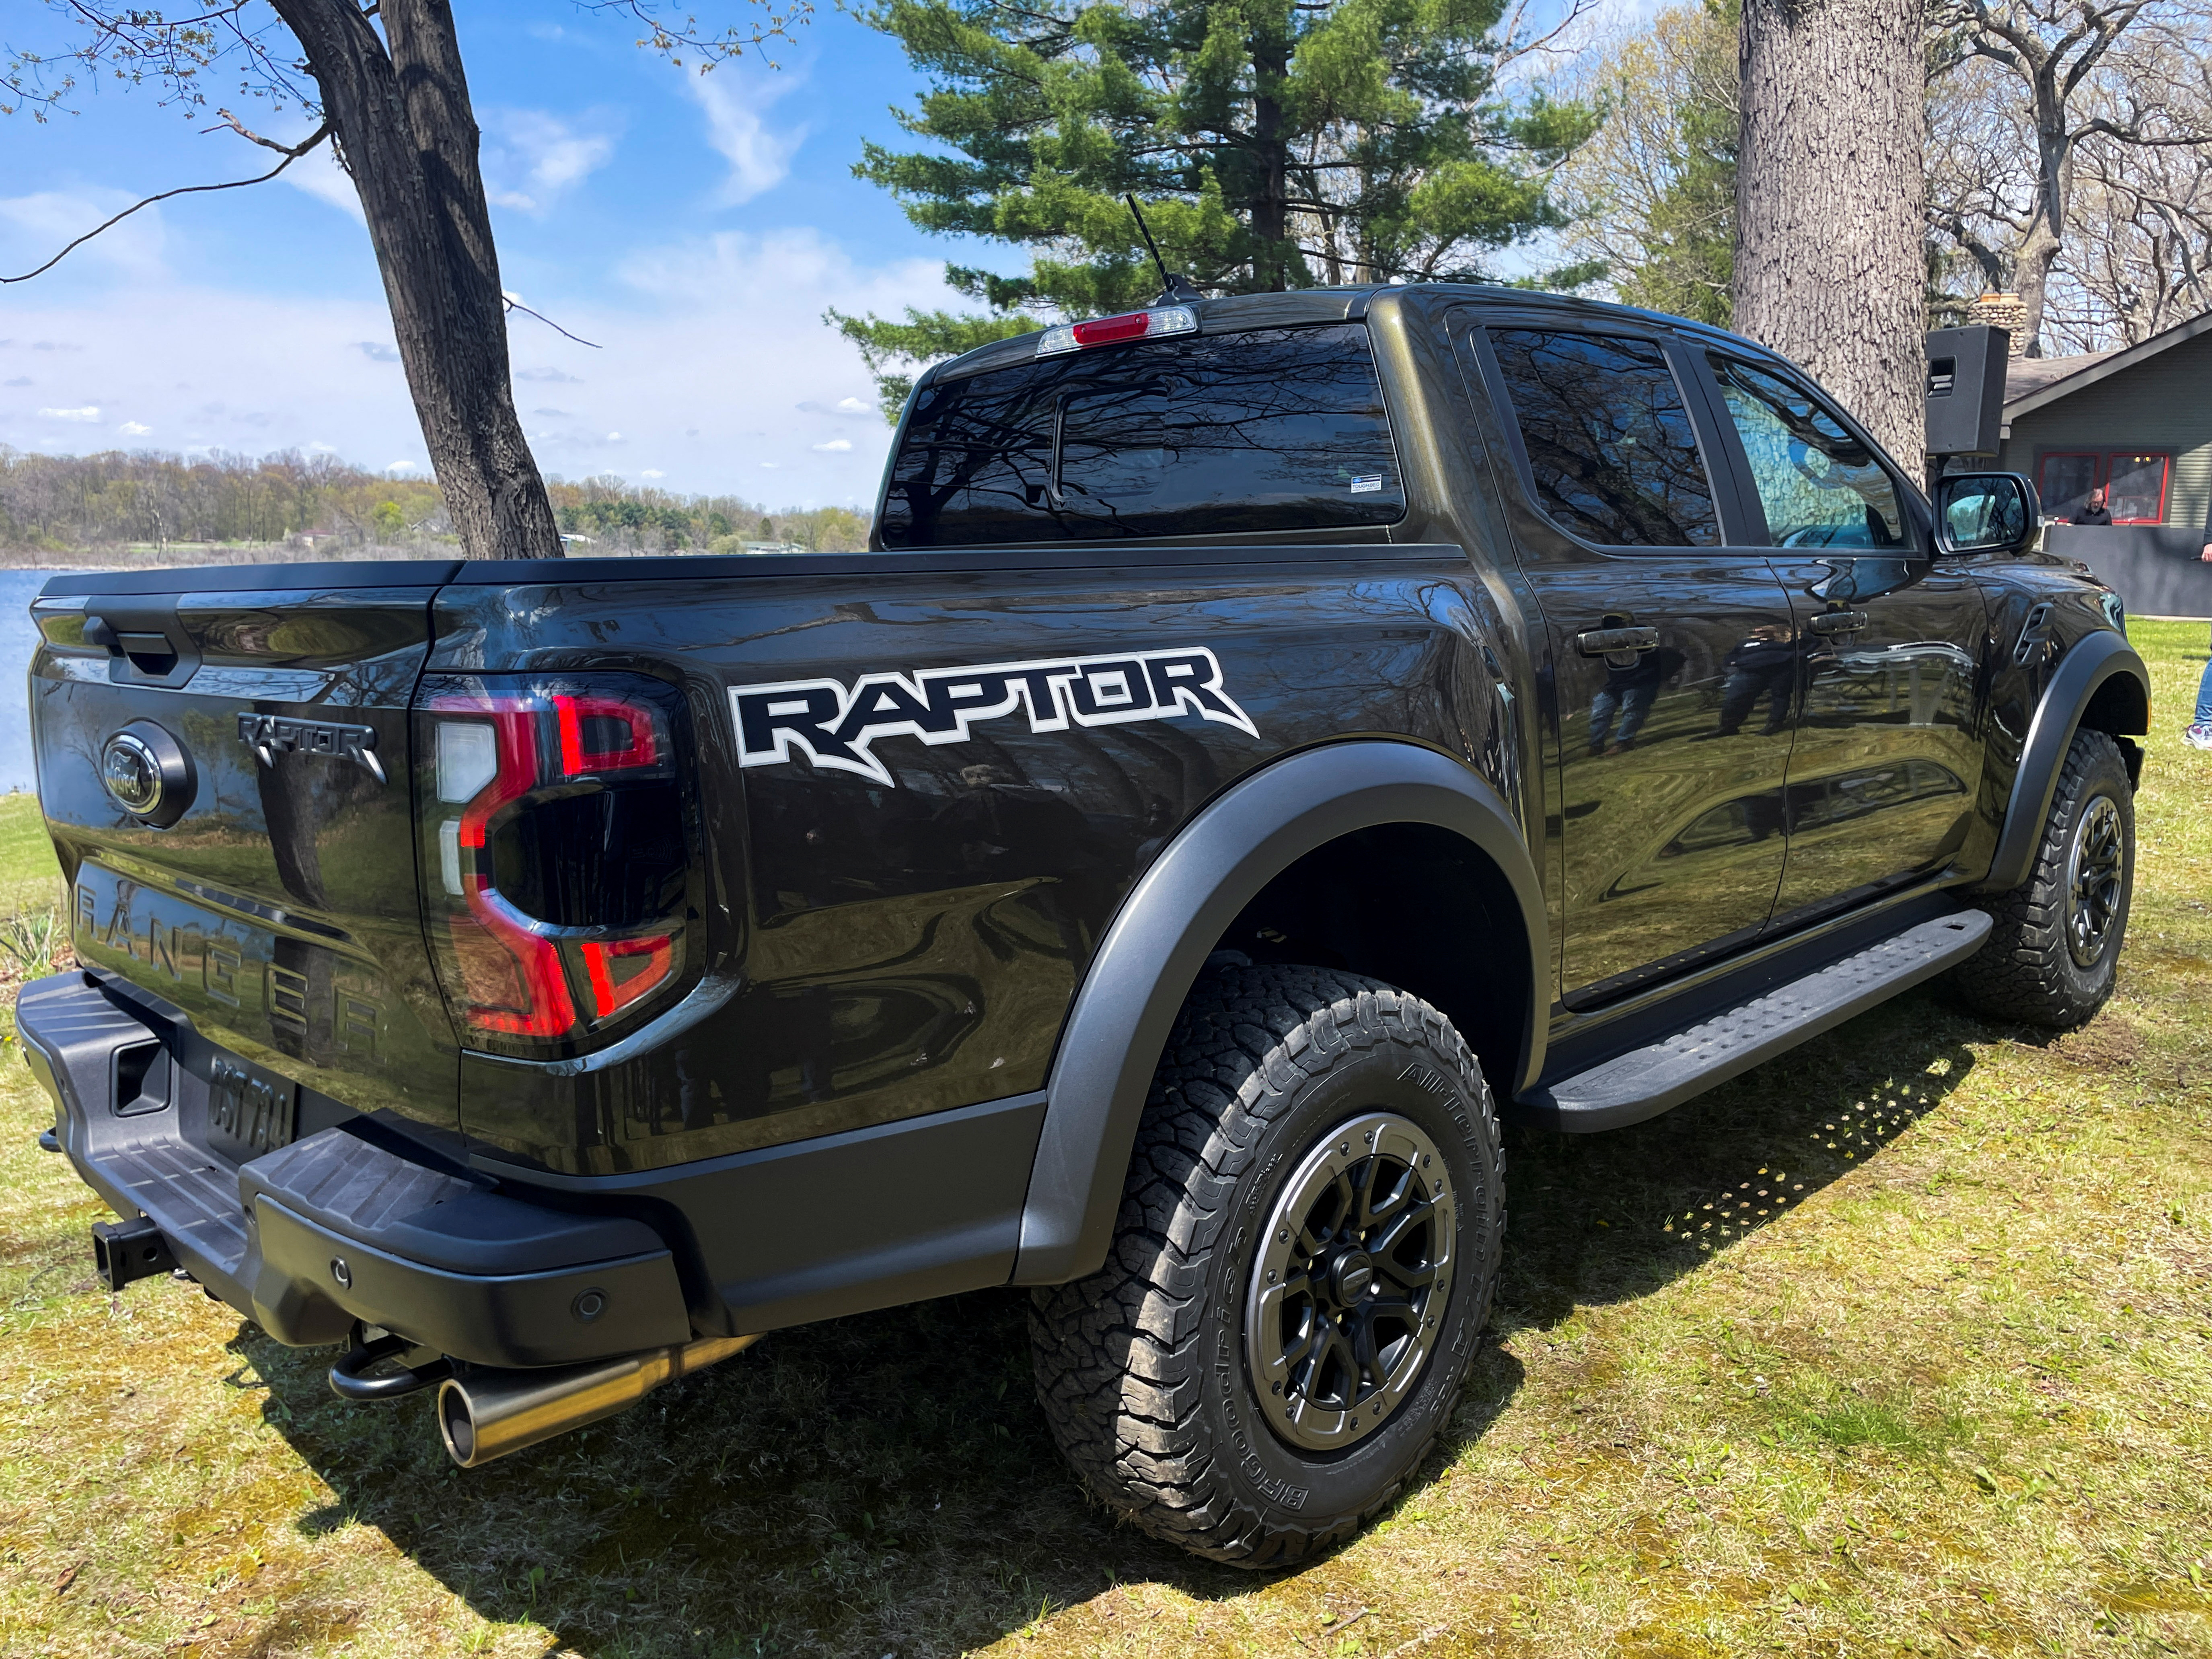 Ford's new muscle truck, Ranger Raptor, made possible by EVs